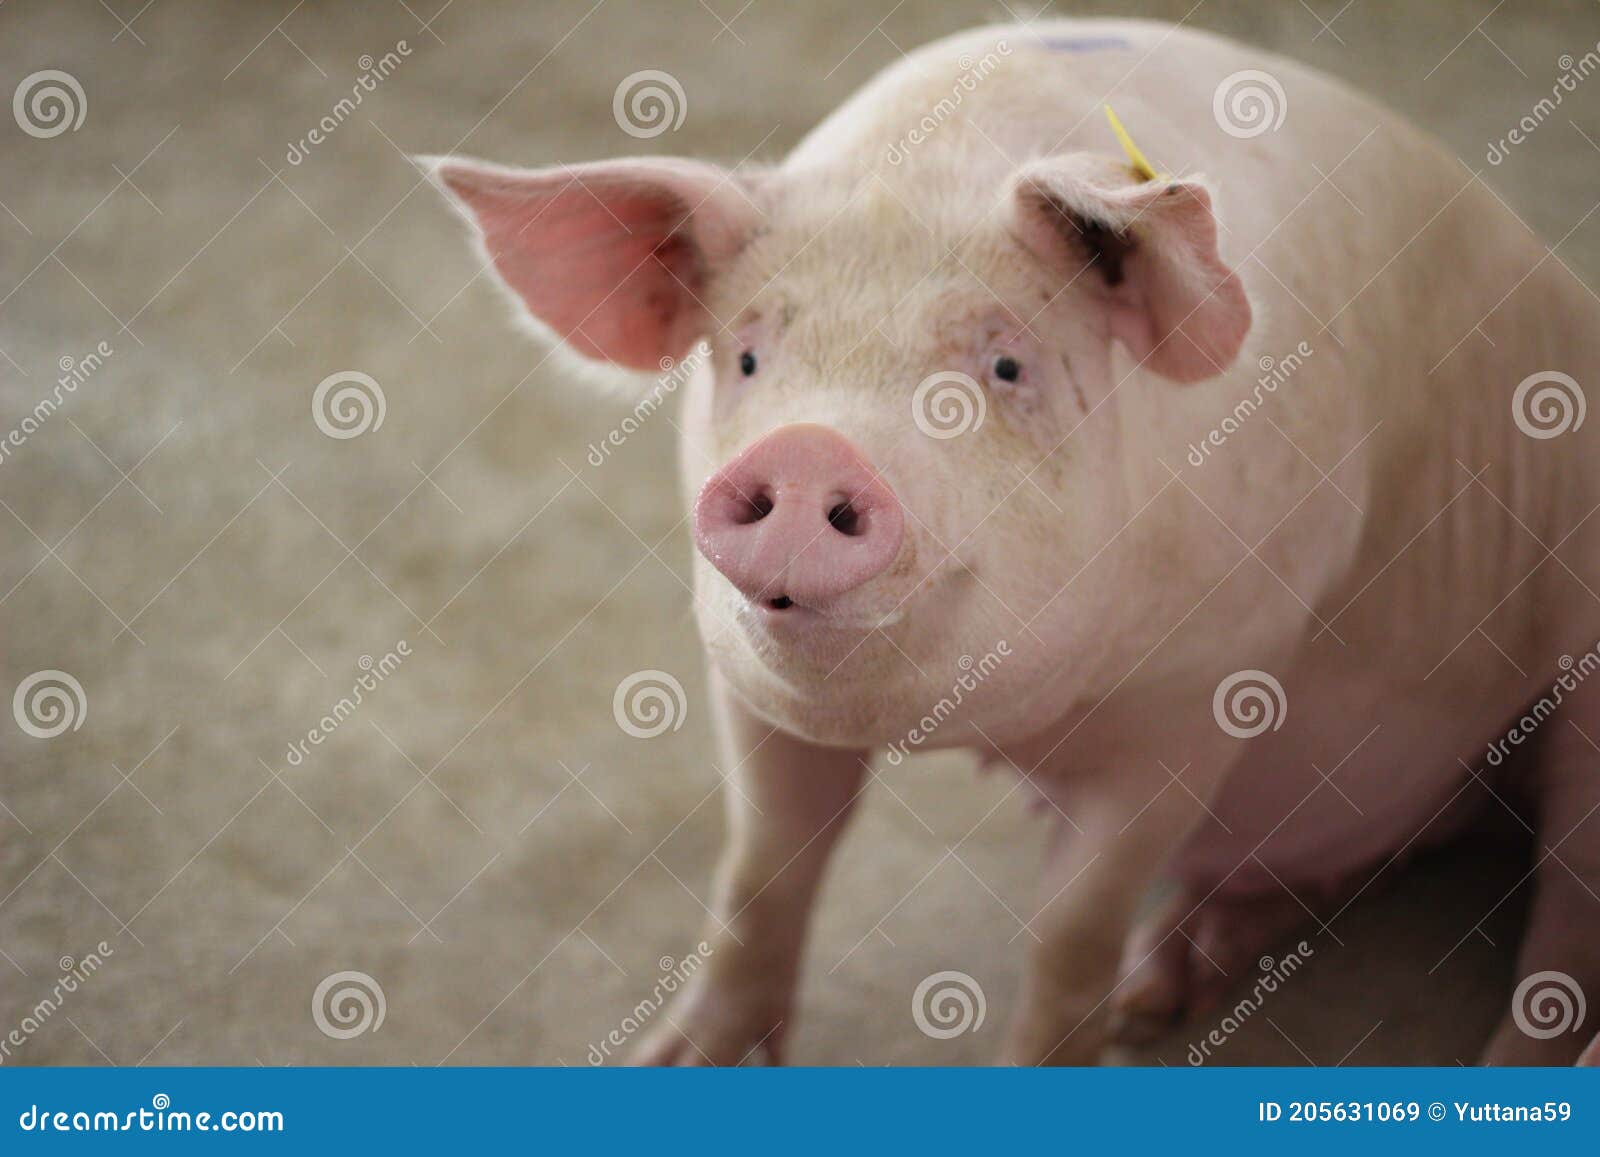 the happy fattening pig in big commercial swine farm